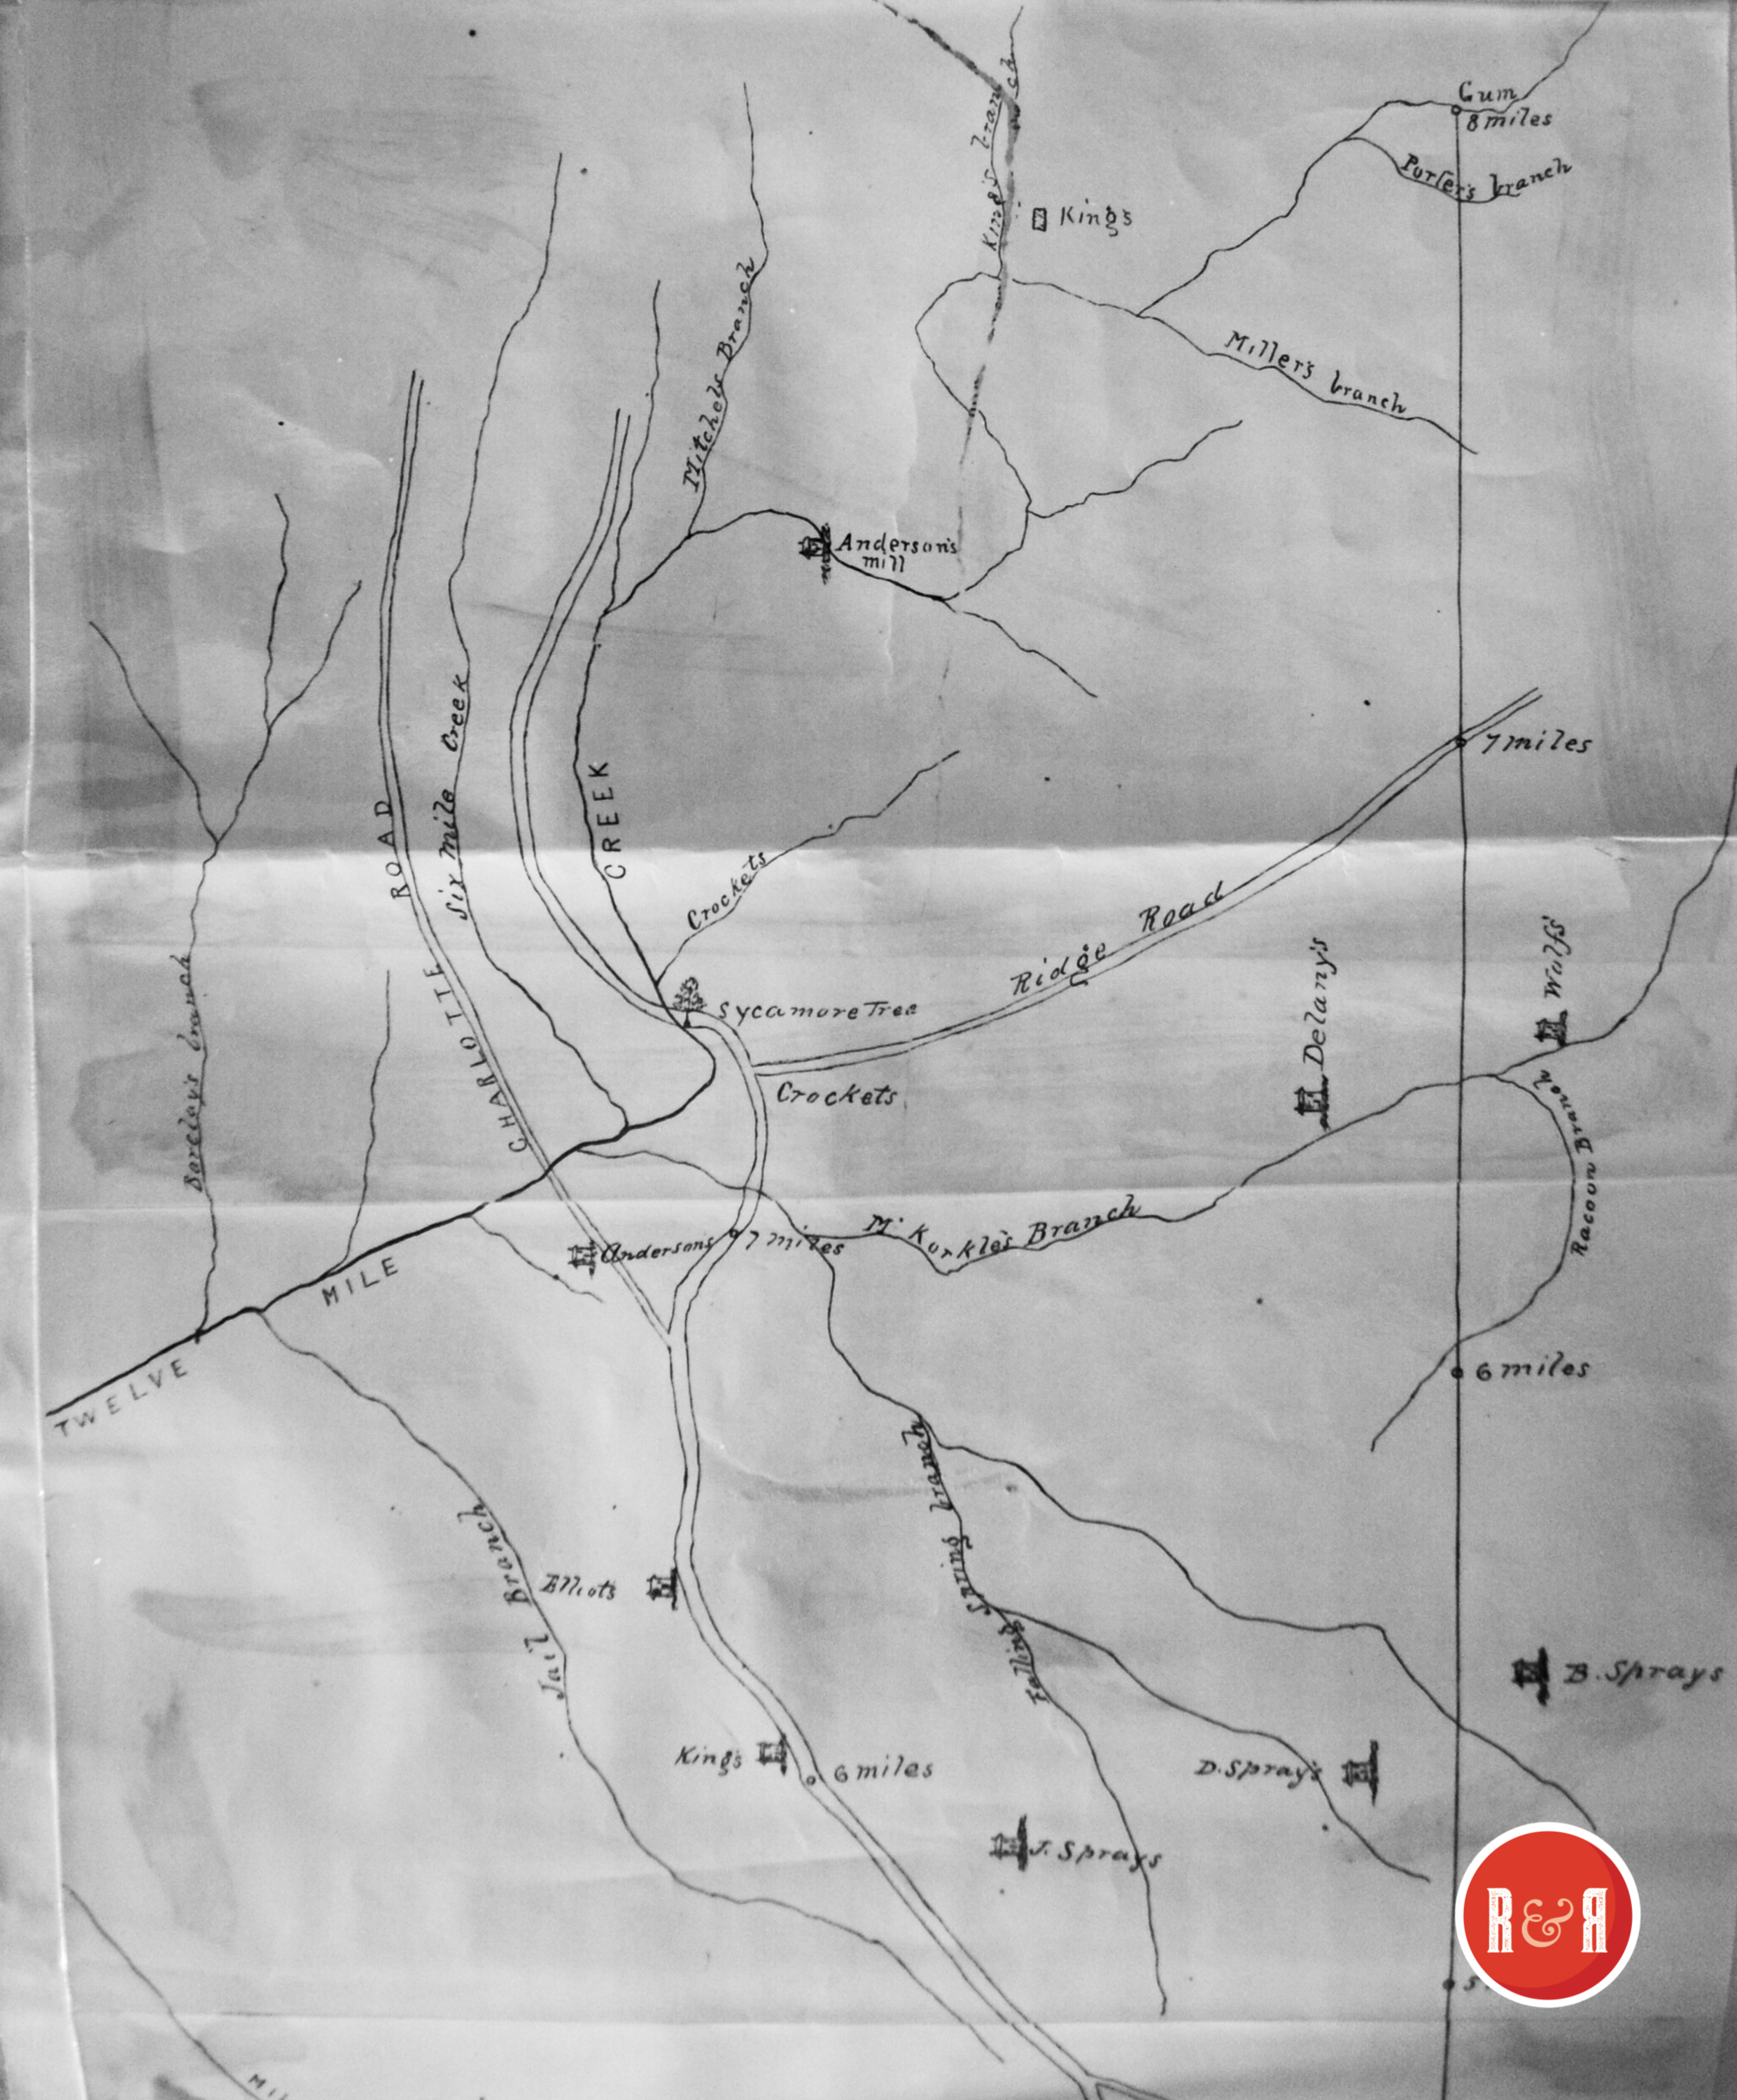 SECTION I - LARGE VIEW MAP